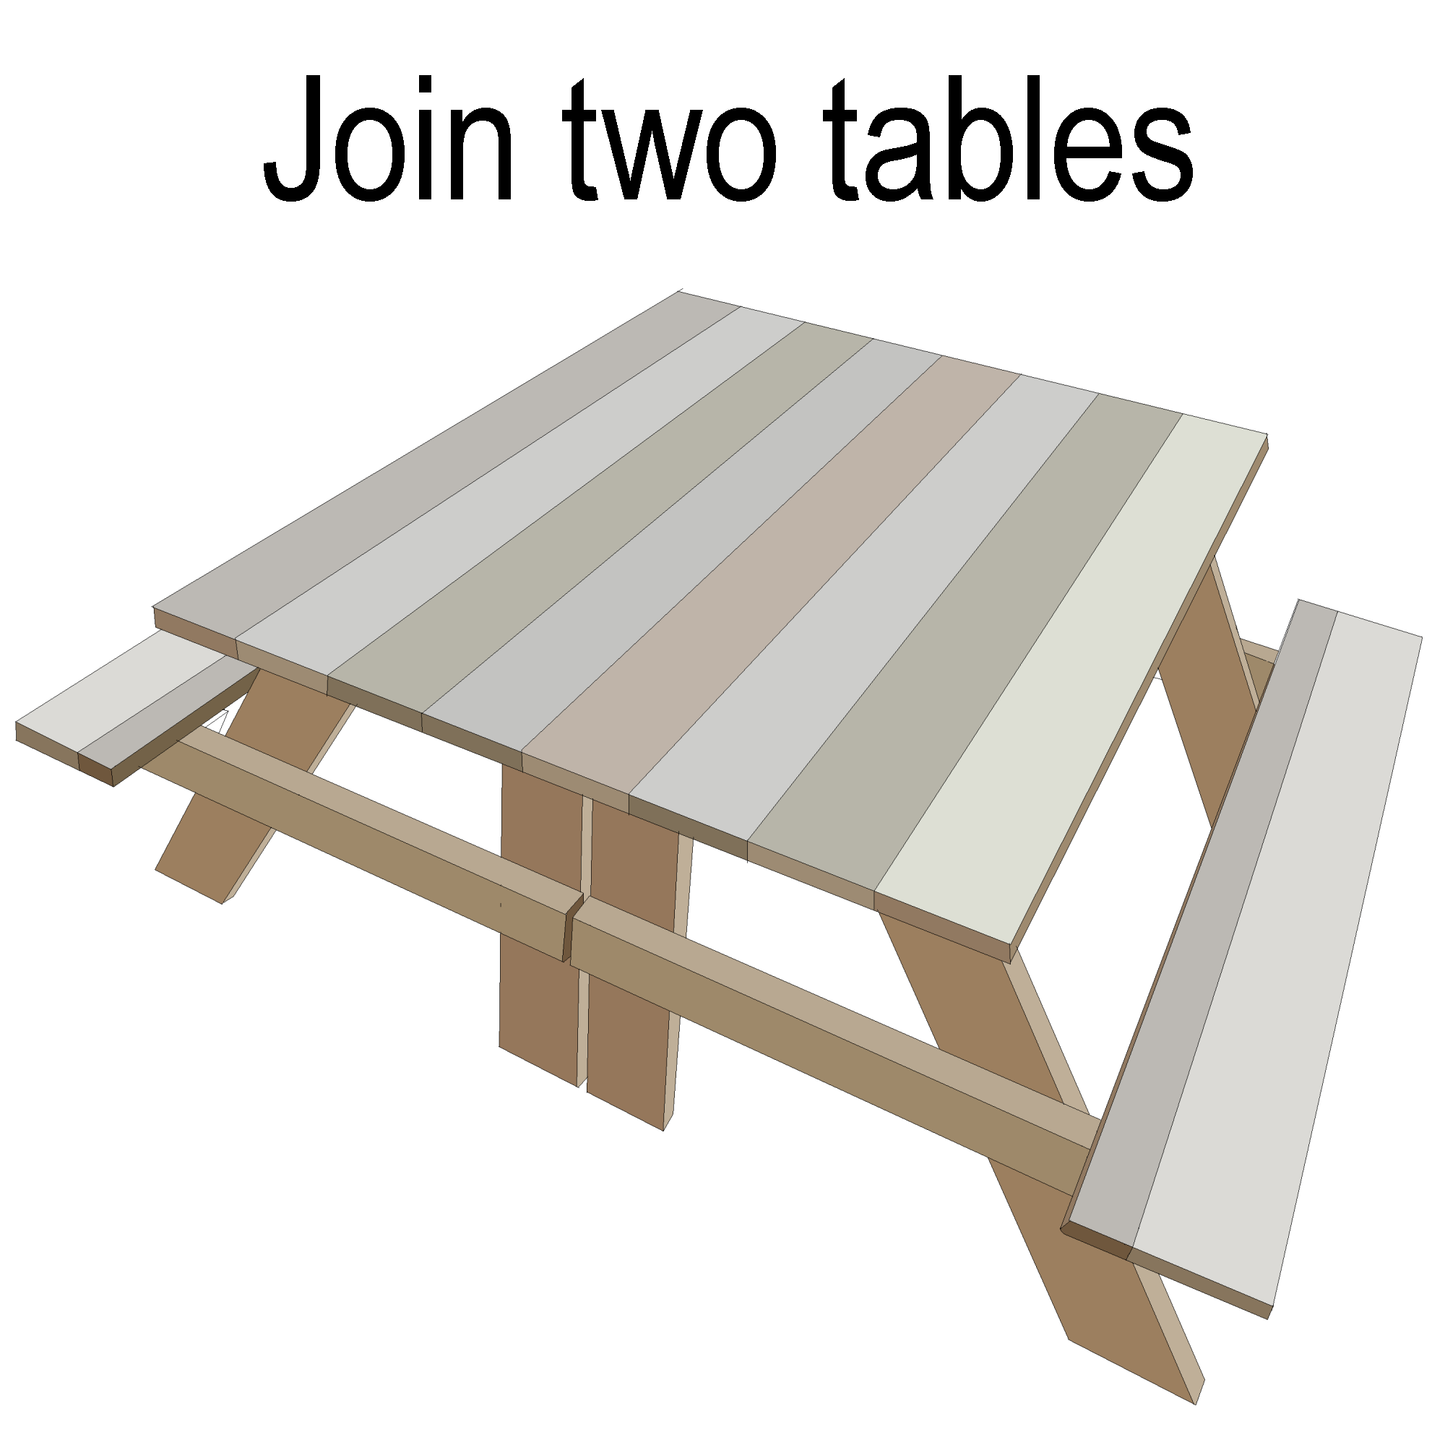 DIY plans for a picnic table with an attached seat along one side